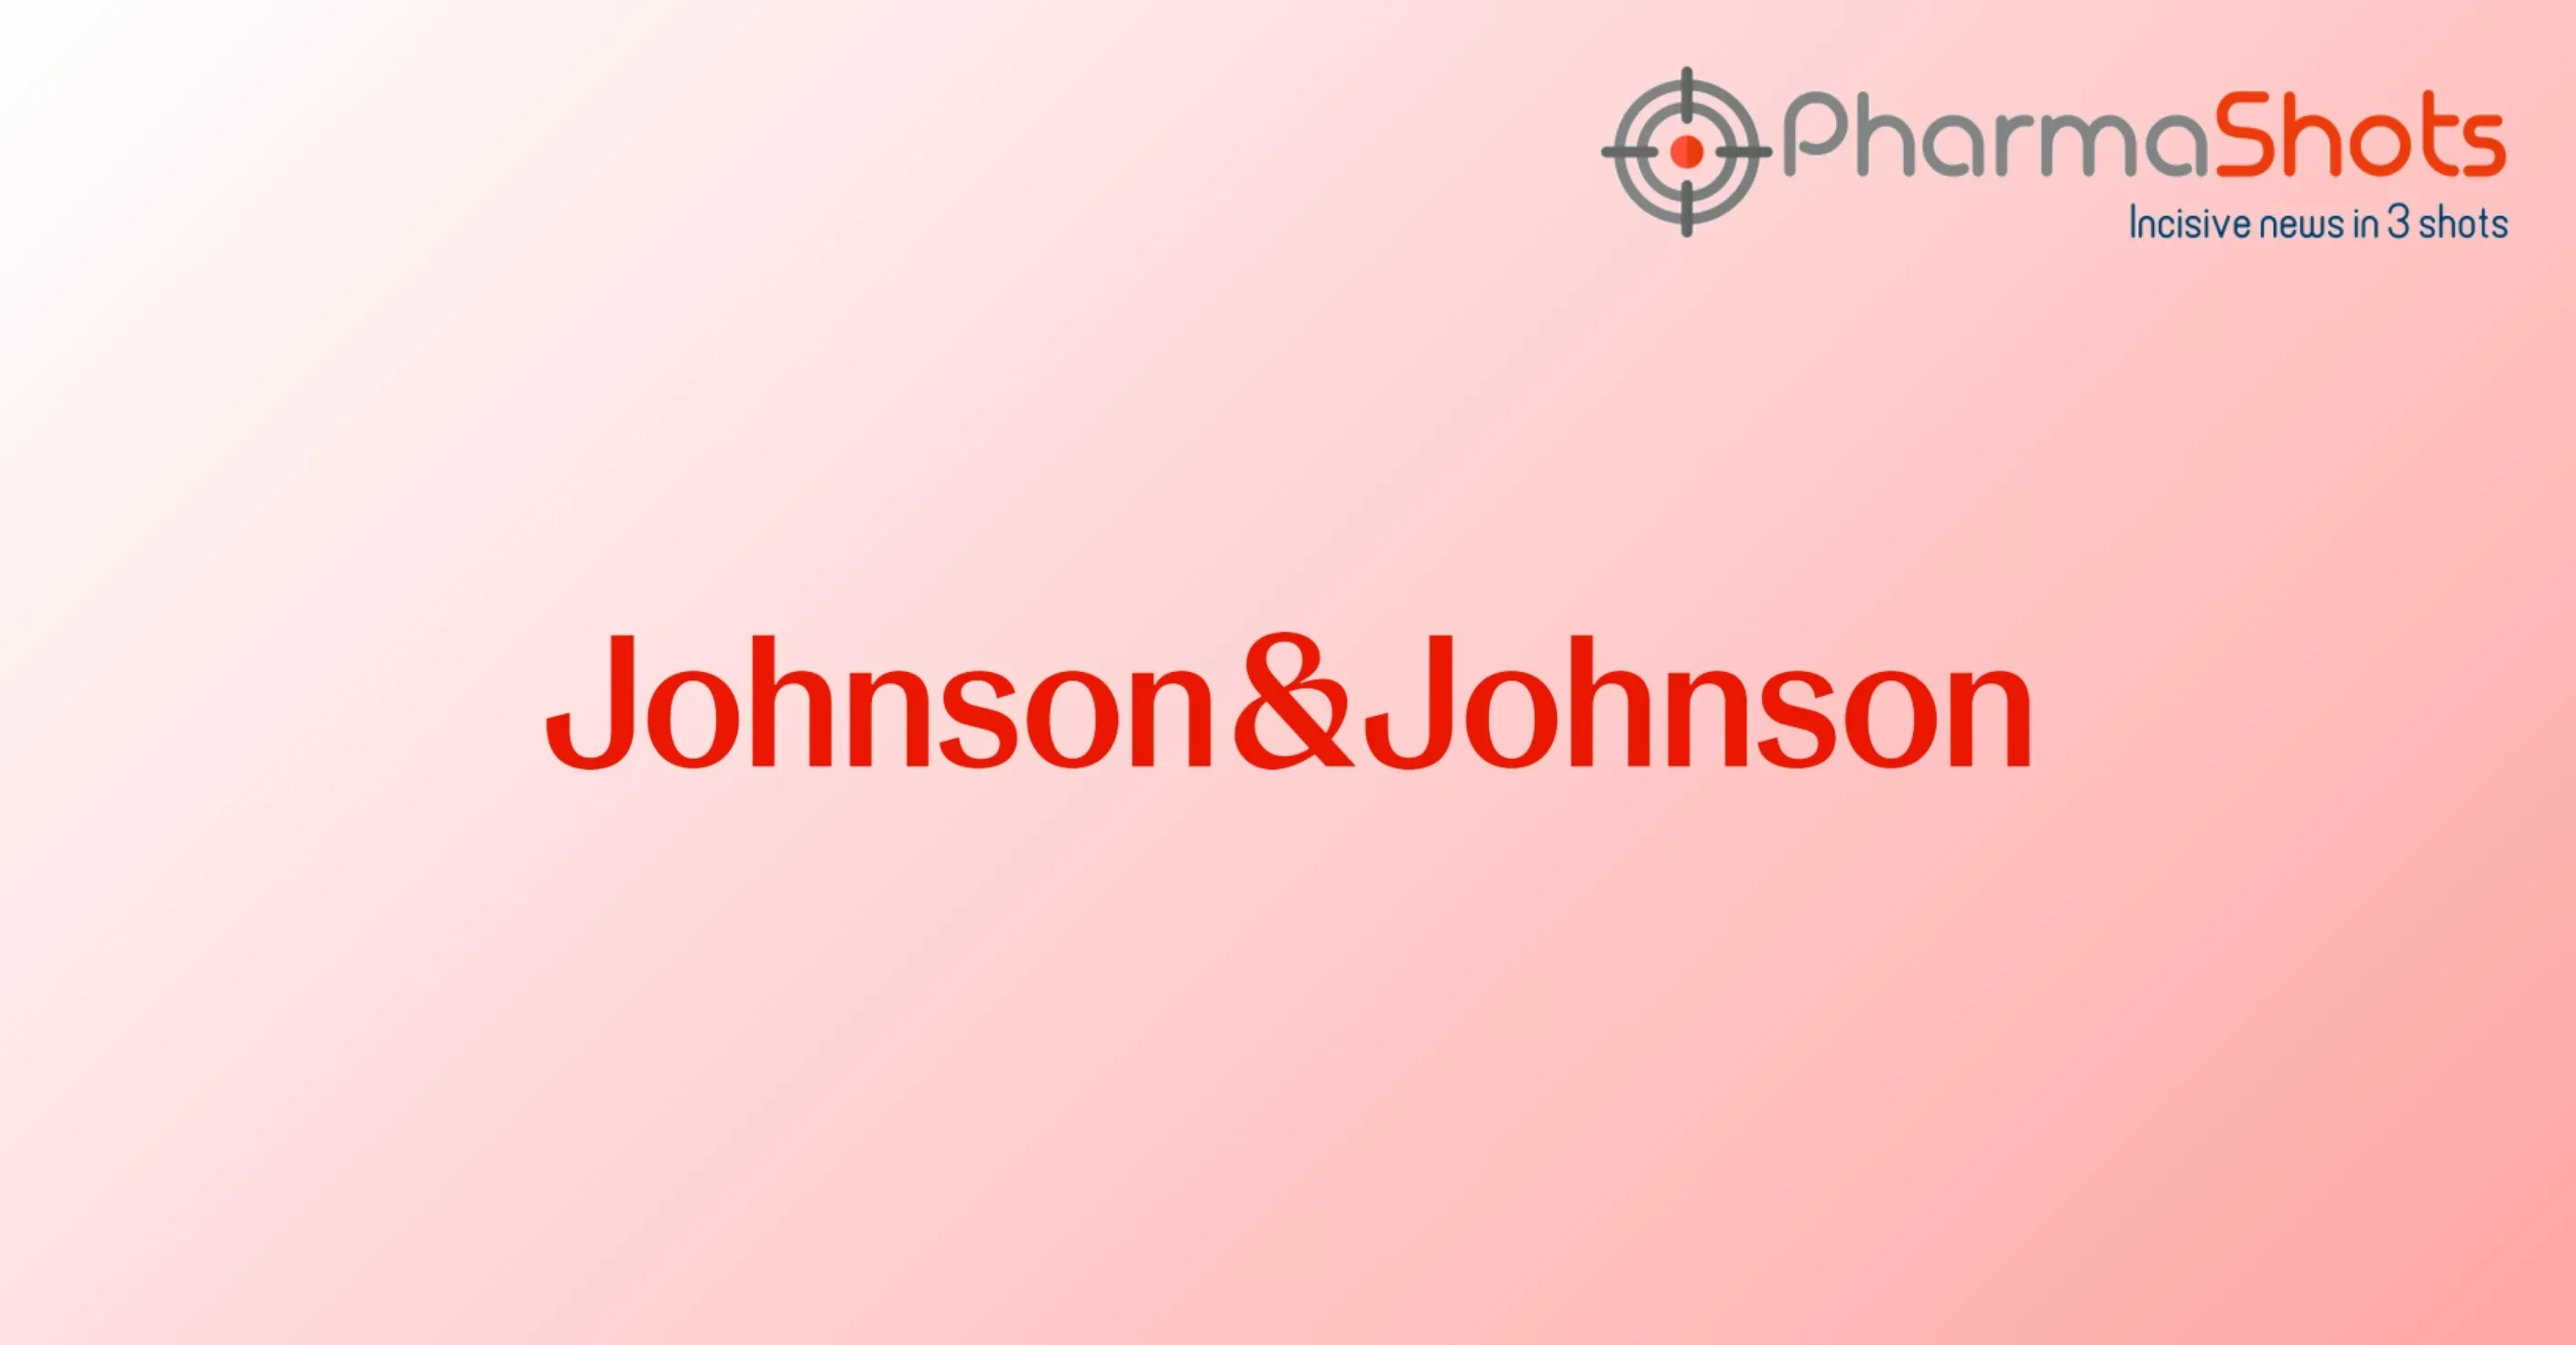 Johnson & Johnson Reports the Acquisition of Shockwave Medical to Strengthen its MedTech Cardiovascular Portfolio